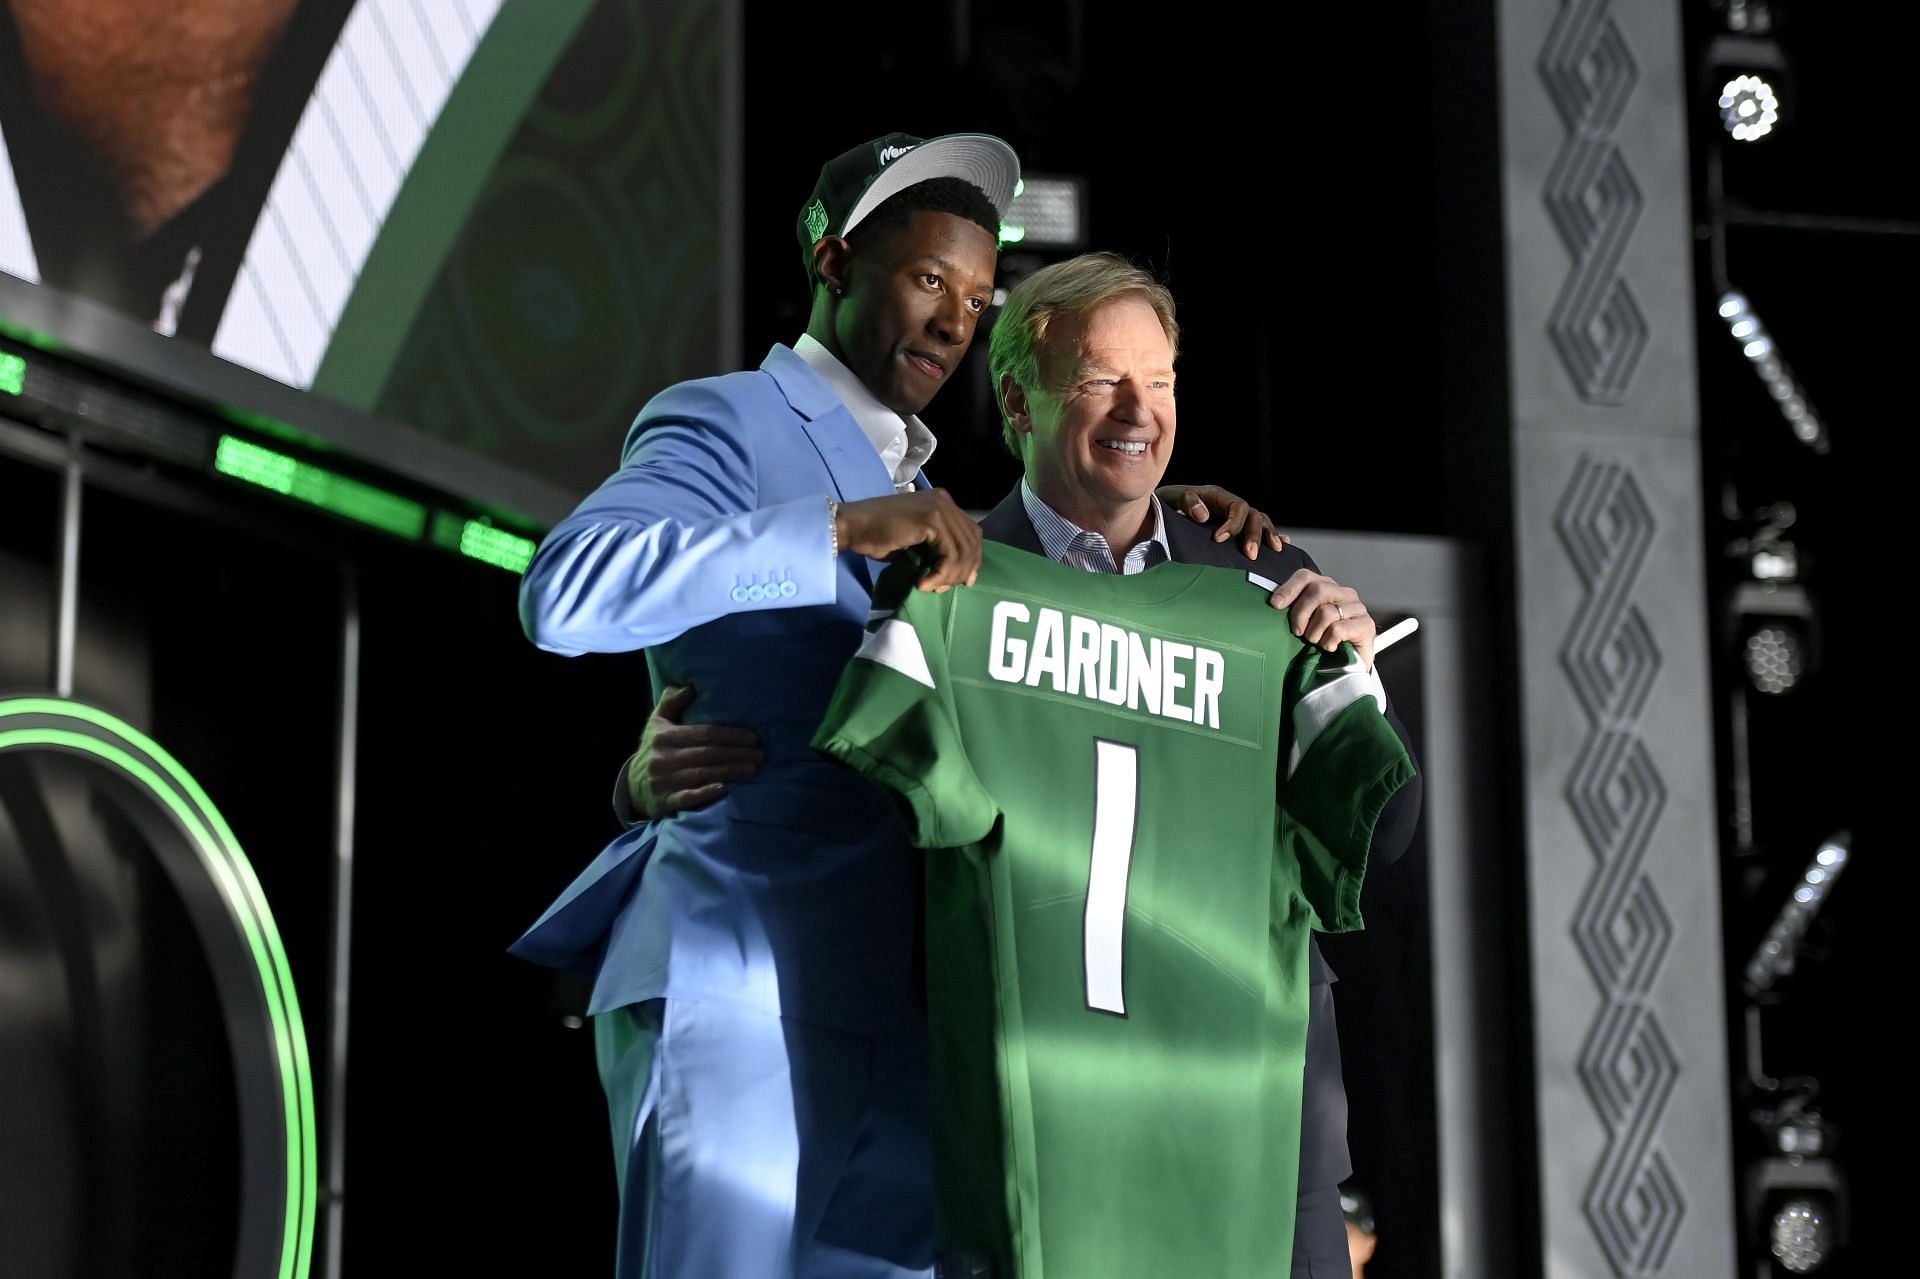 Ahmad Gardner was the first player selected by the New Yiork Jets